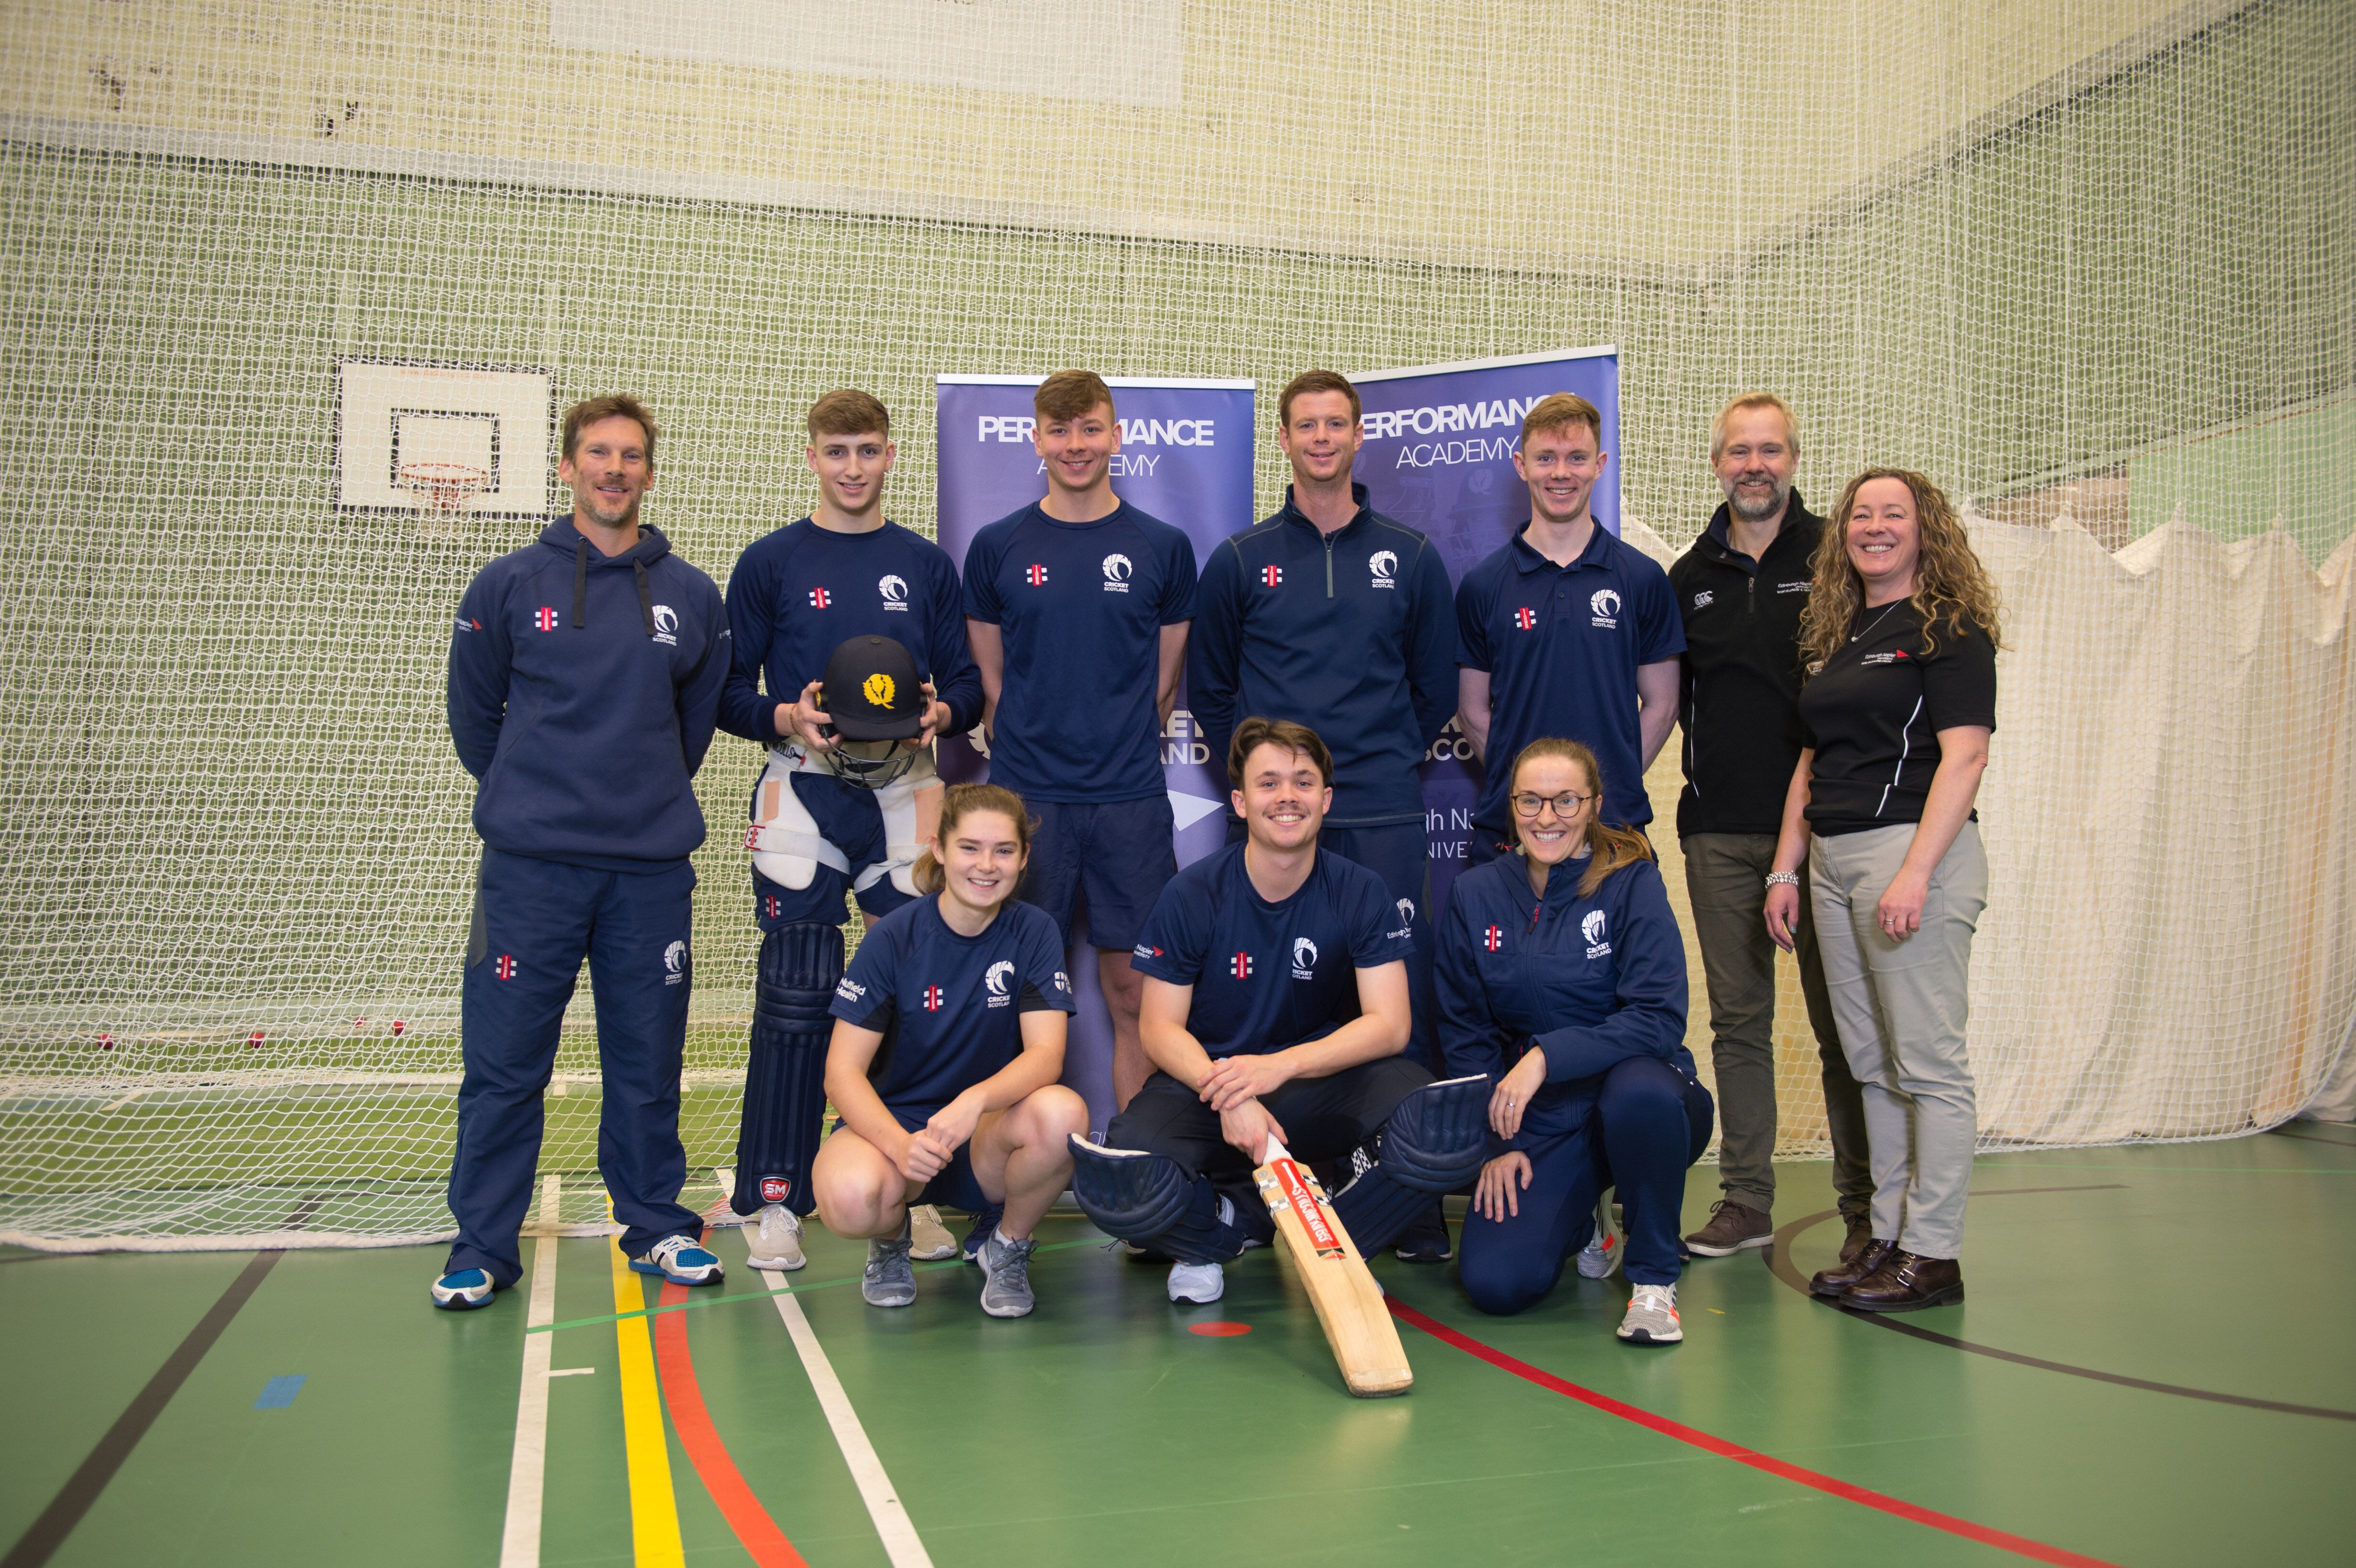 Cricket Scotland and Napier University Launch a New Exciting Partnership